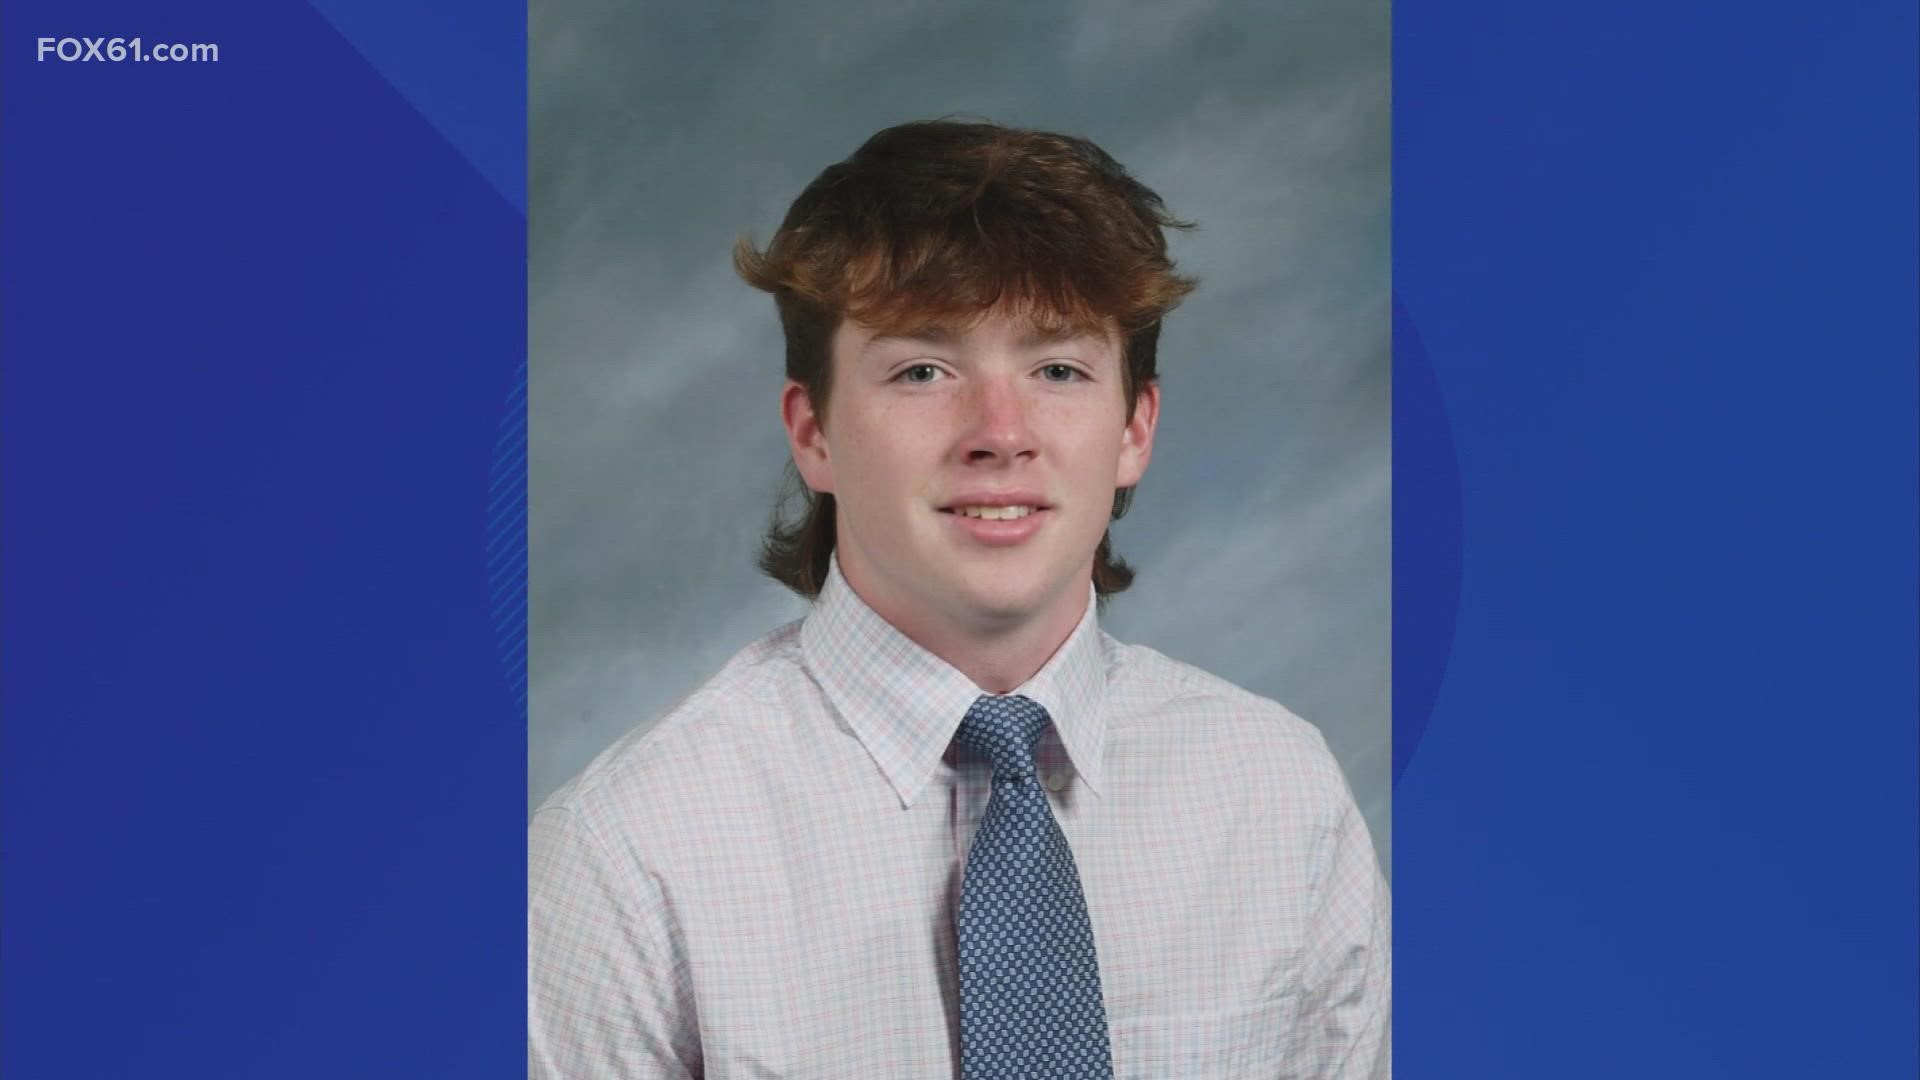 The teen is charged with murder in connection with the fatal stabbing of 17-year-old Shelton resident James McGrath.